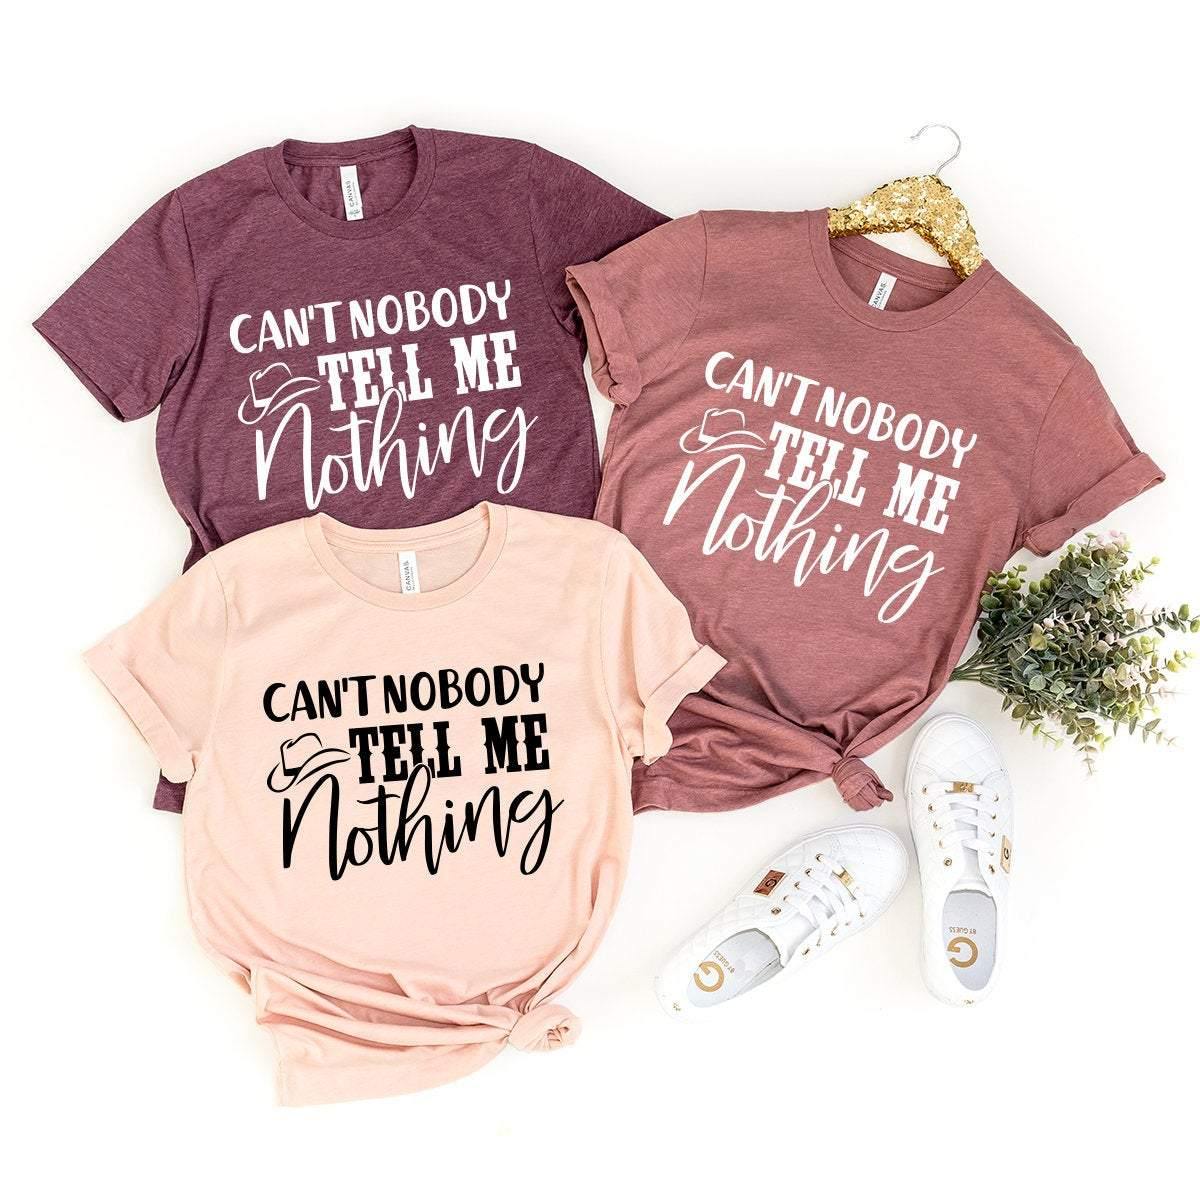 Western Women Shirt, Country Shirt, Southern Graphic Tee, Western Graphic Tee, Can't Nobody Tell Me Nothing Shirt, Country Song Shirt - Fastdeliverytees.com